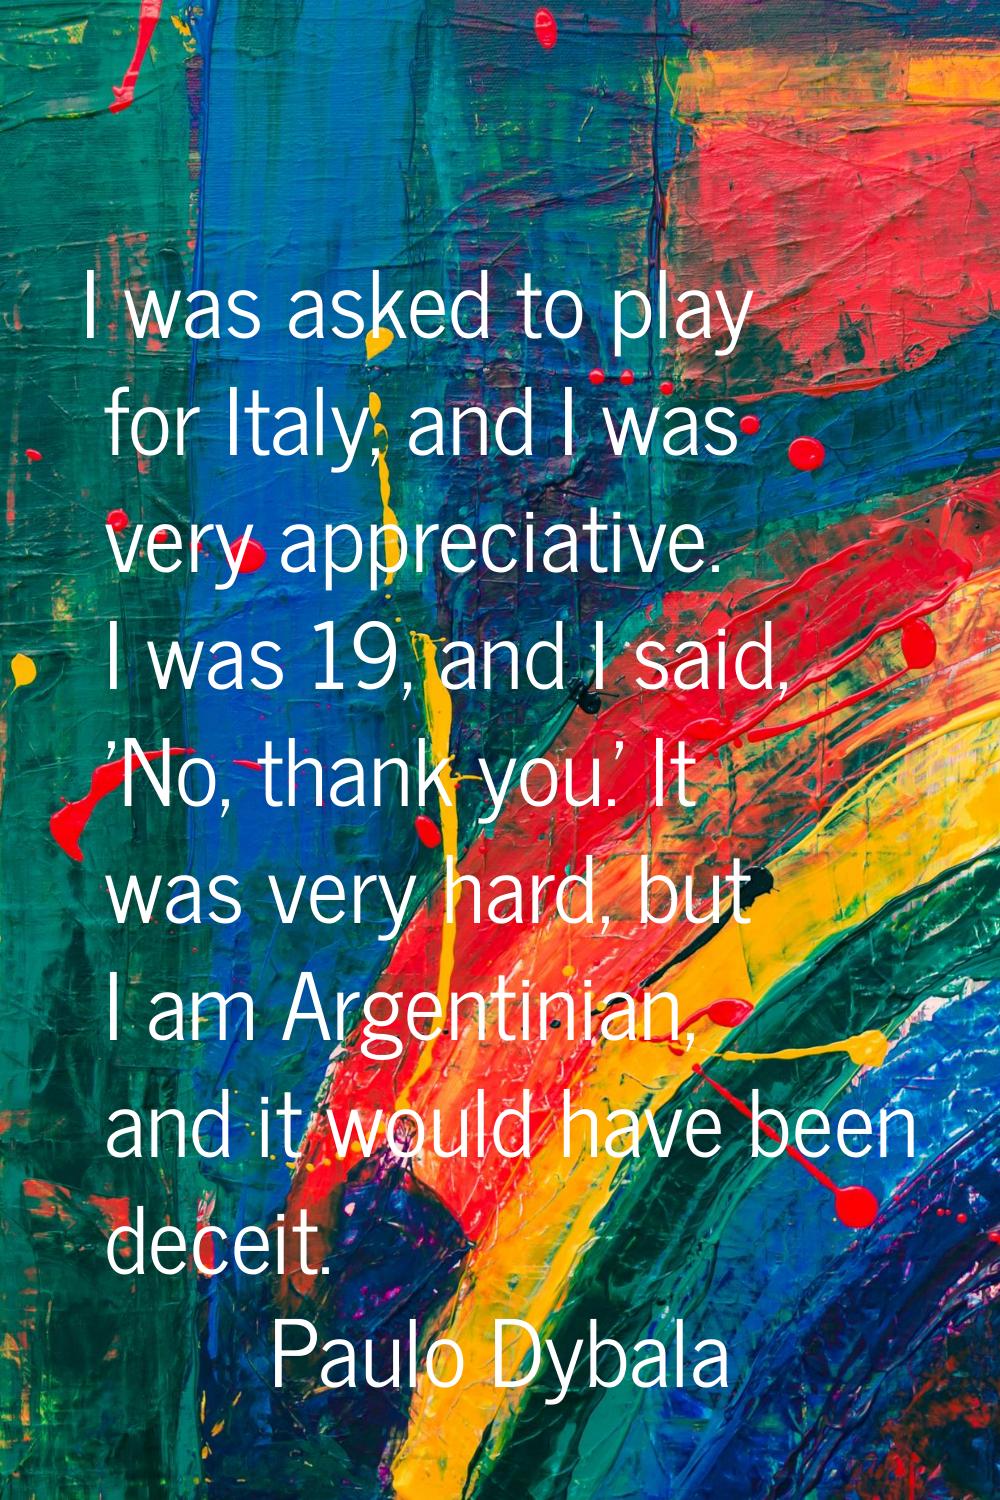 I was asked to play for Italy, and I was very appreciative. I was 19, and I said, 'No, thank you.' 